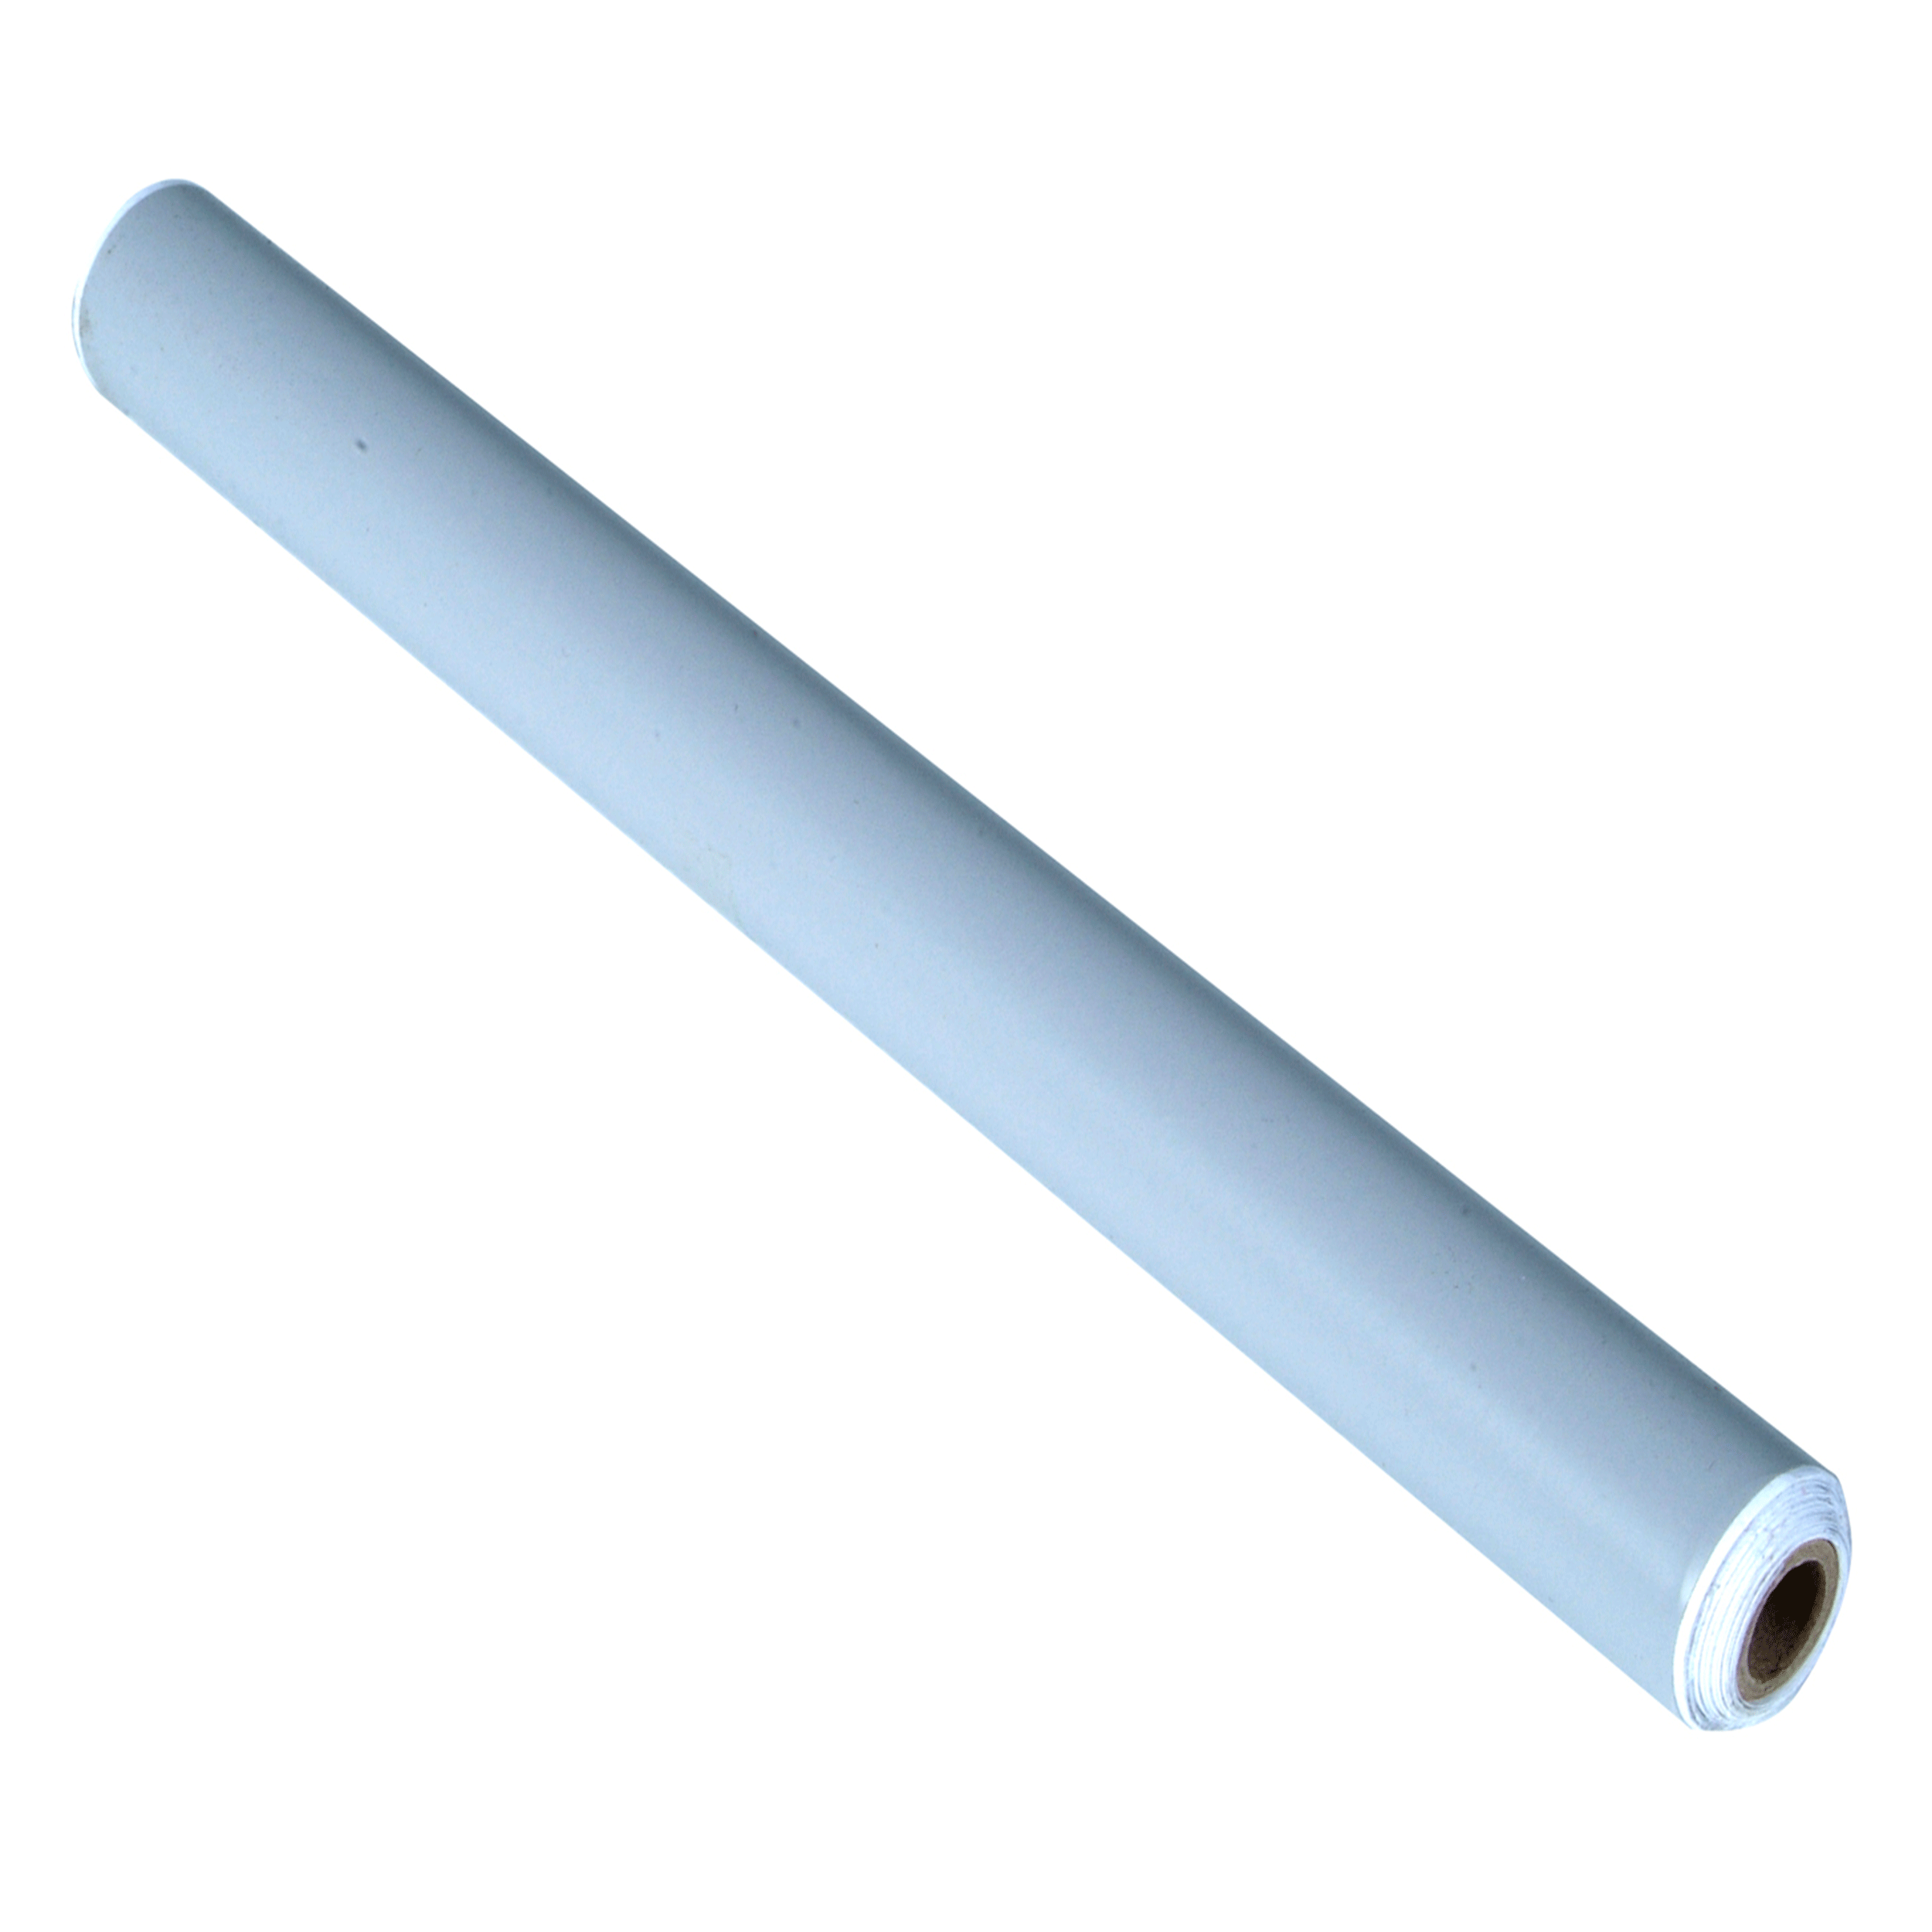 12" X 60" Shadow Board Gray Vinyl Self-adhesive Tape Roll To Silhouette And Manage Tools And Equipment